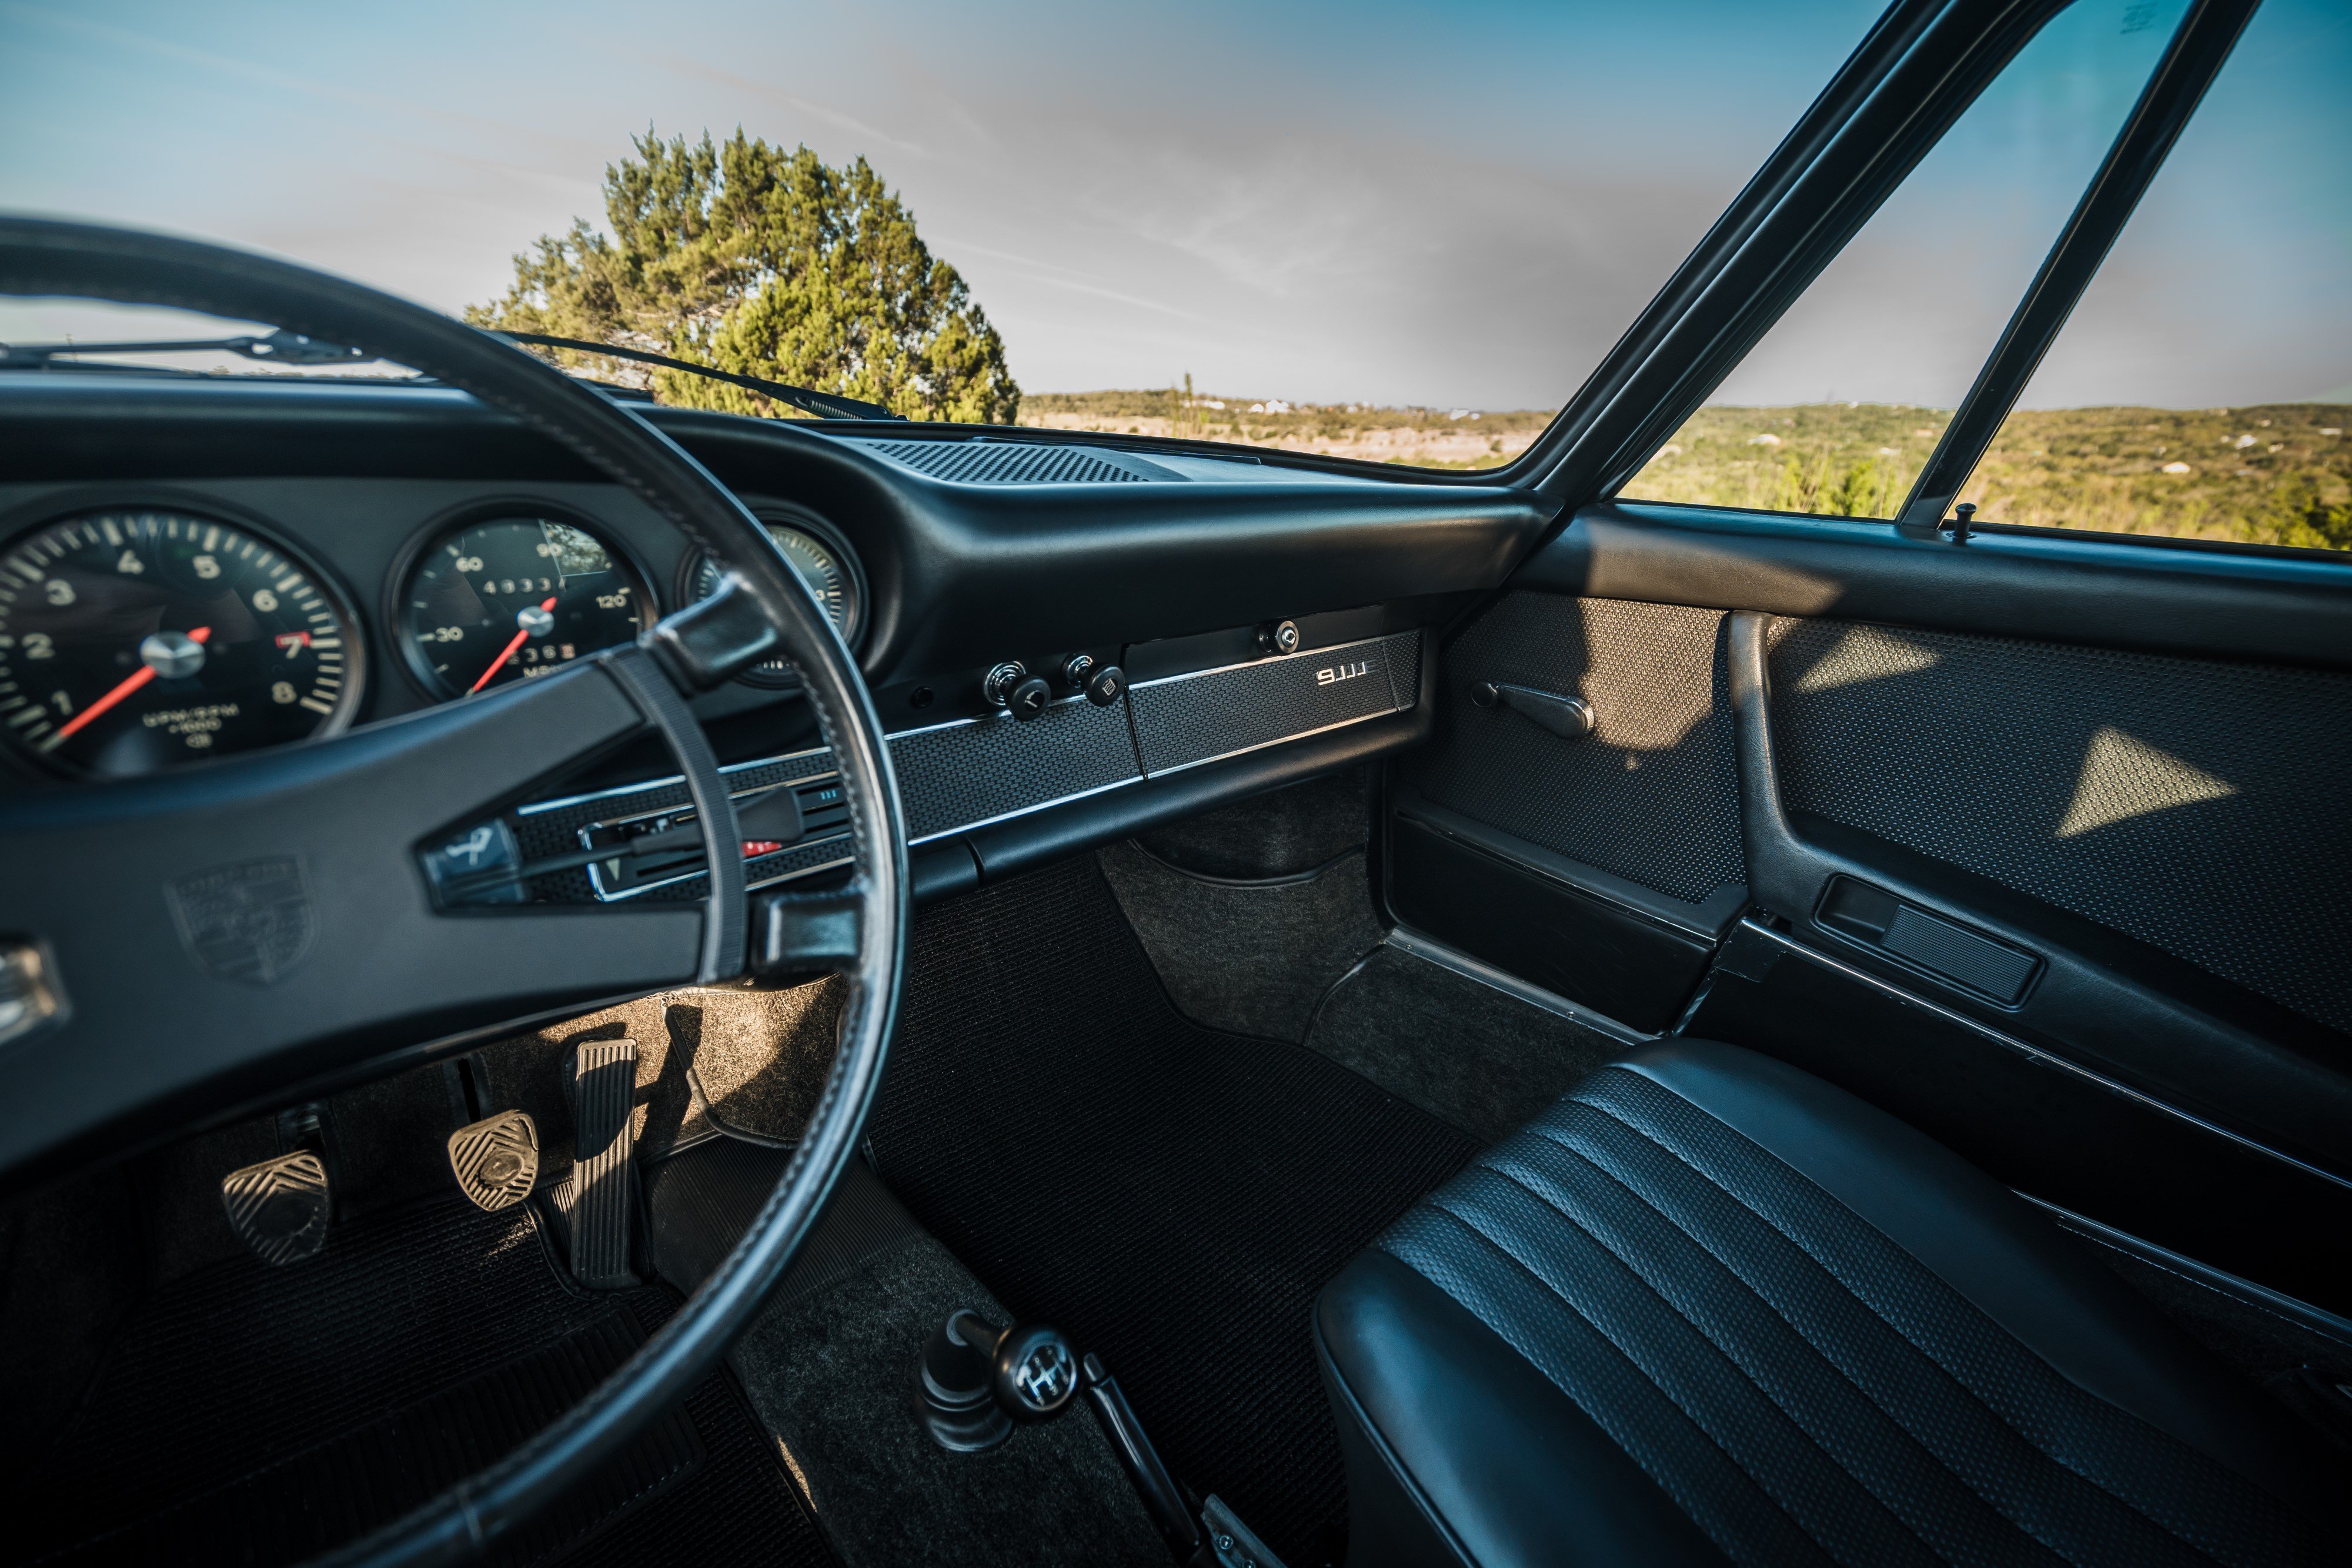 Drivers seat view from a 1971 911E